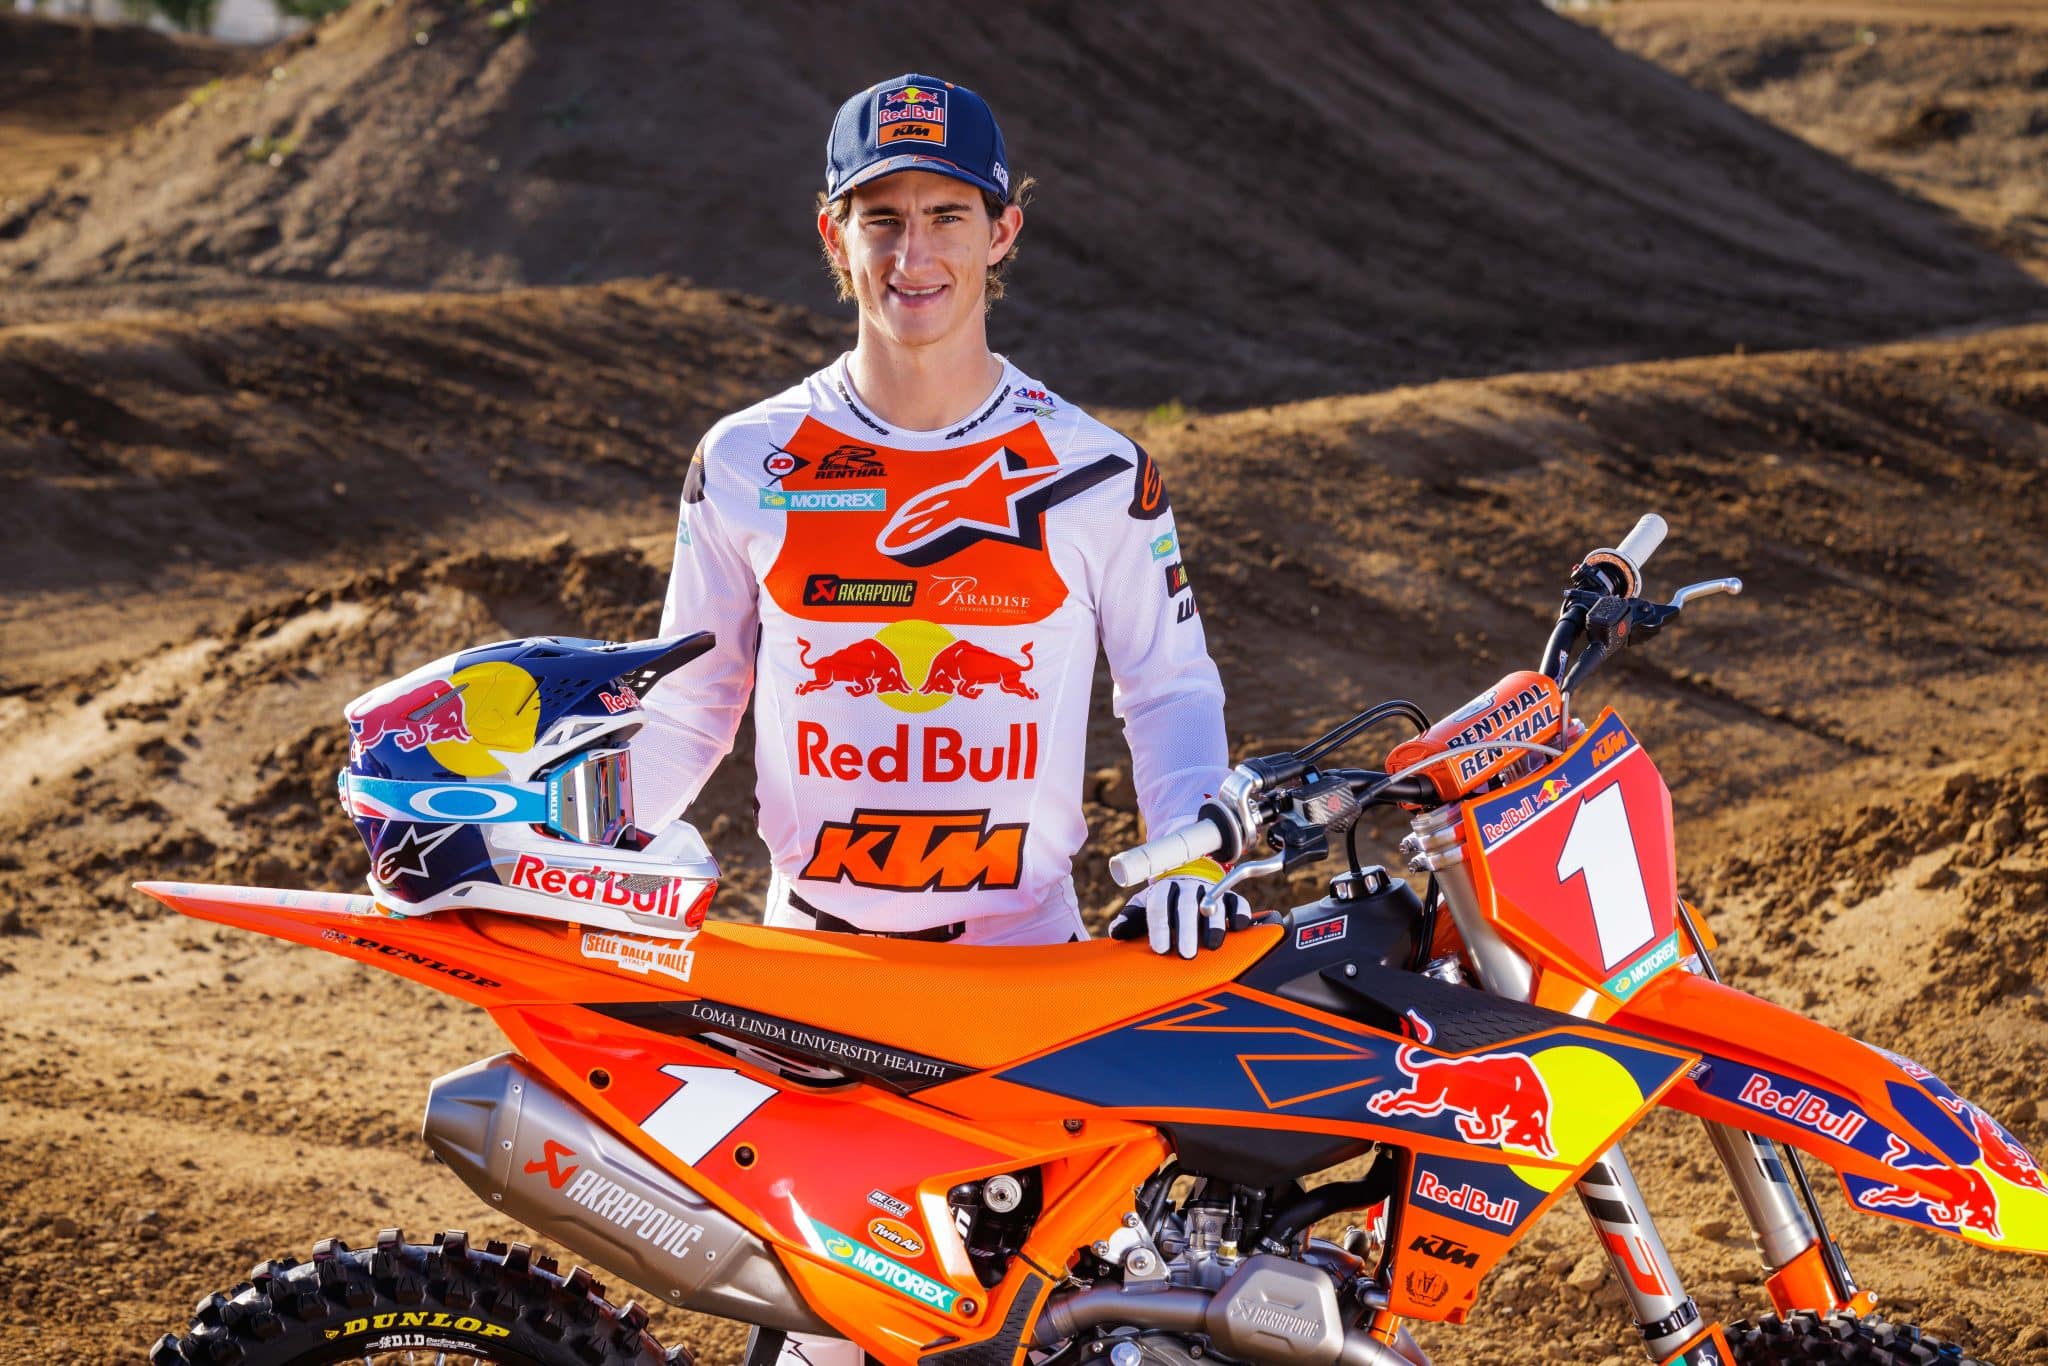 CHASE-SEXTON-04-RED-BULL-KTM-FACTORY-RACING--scaled.jpg